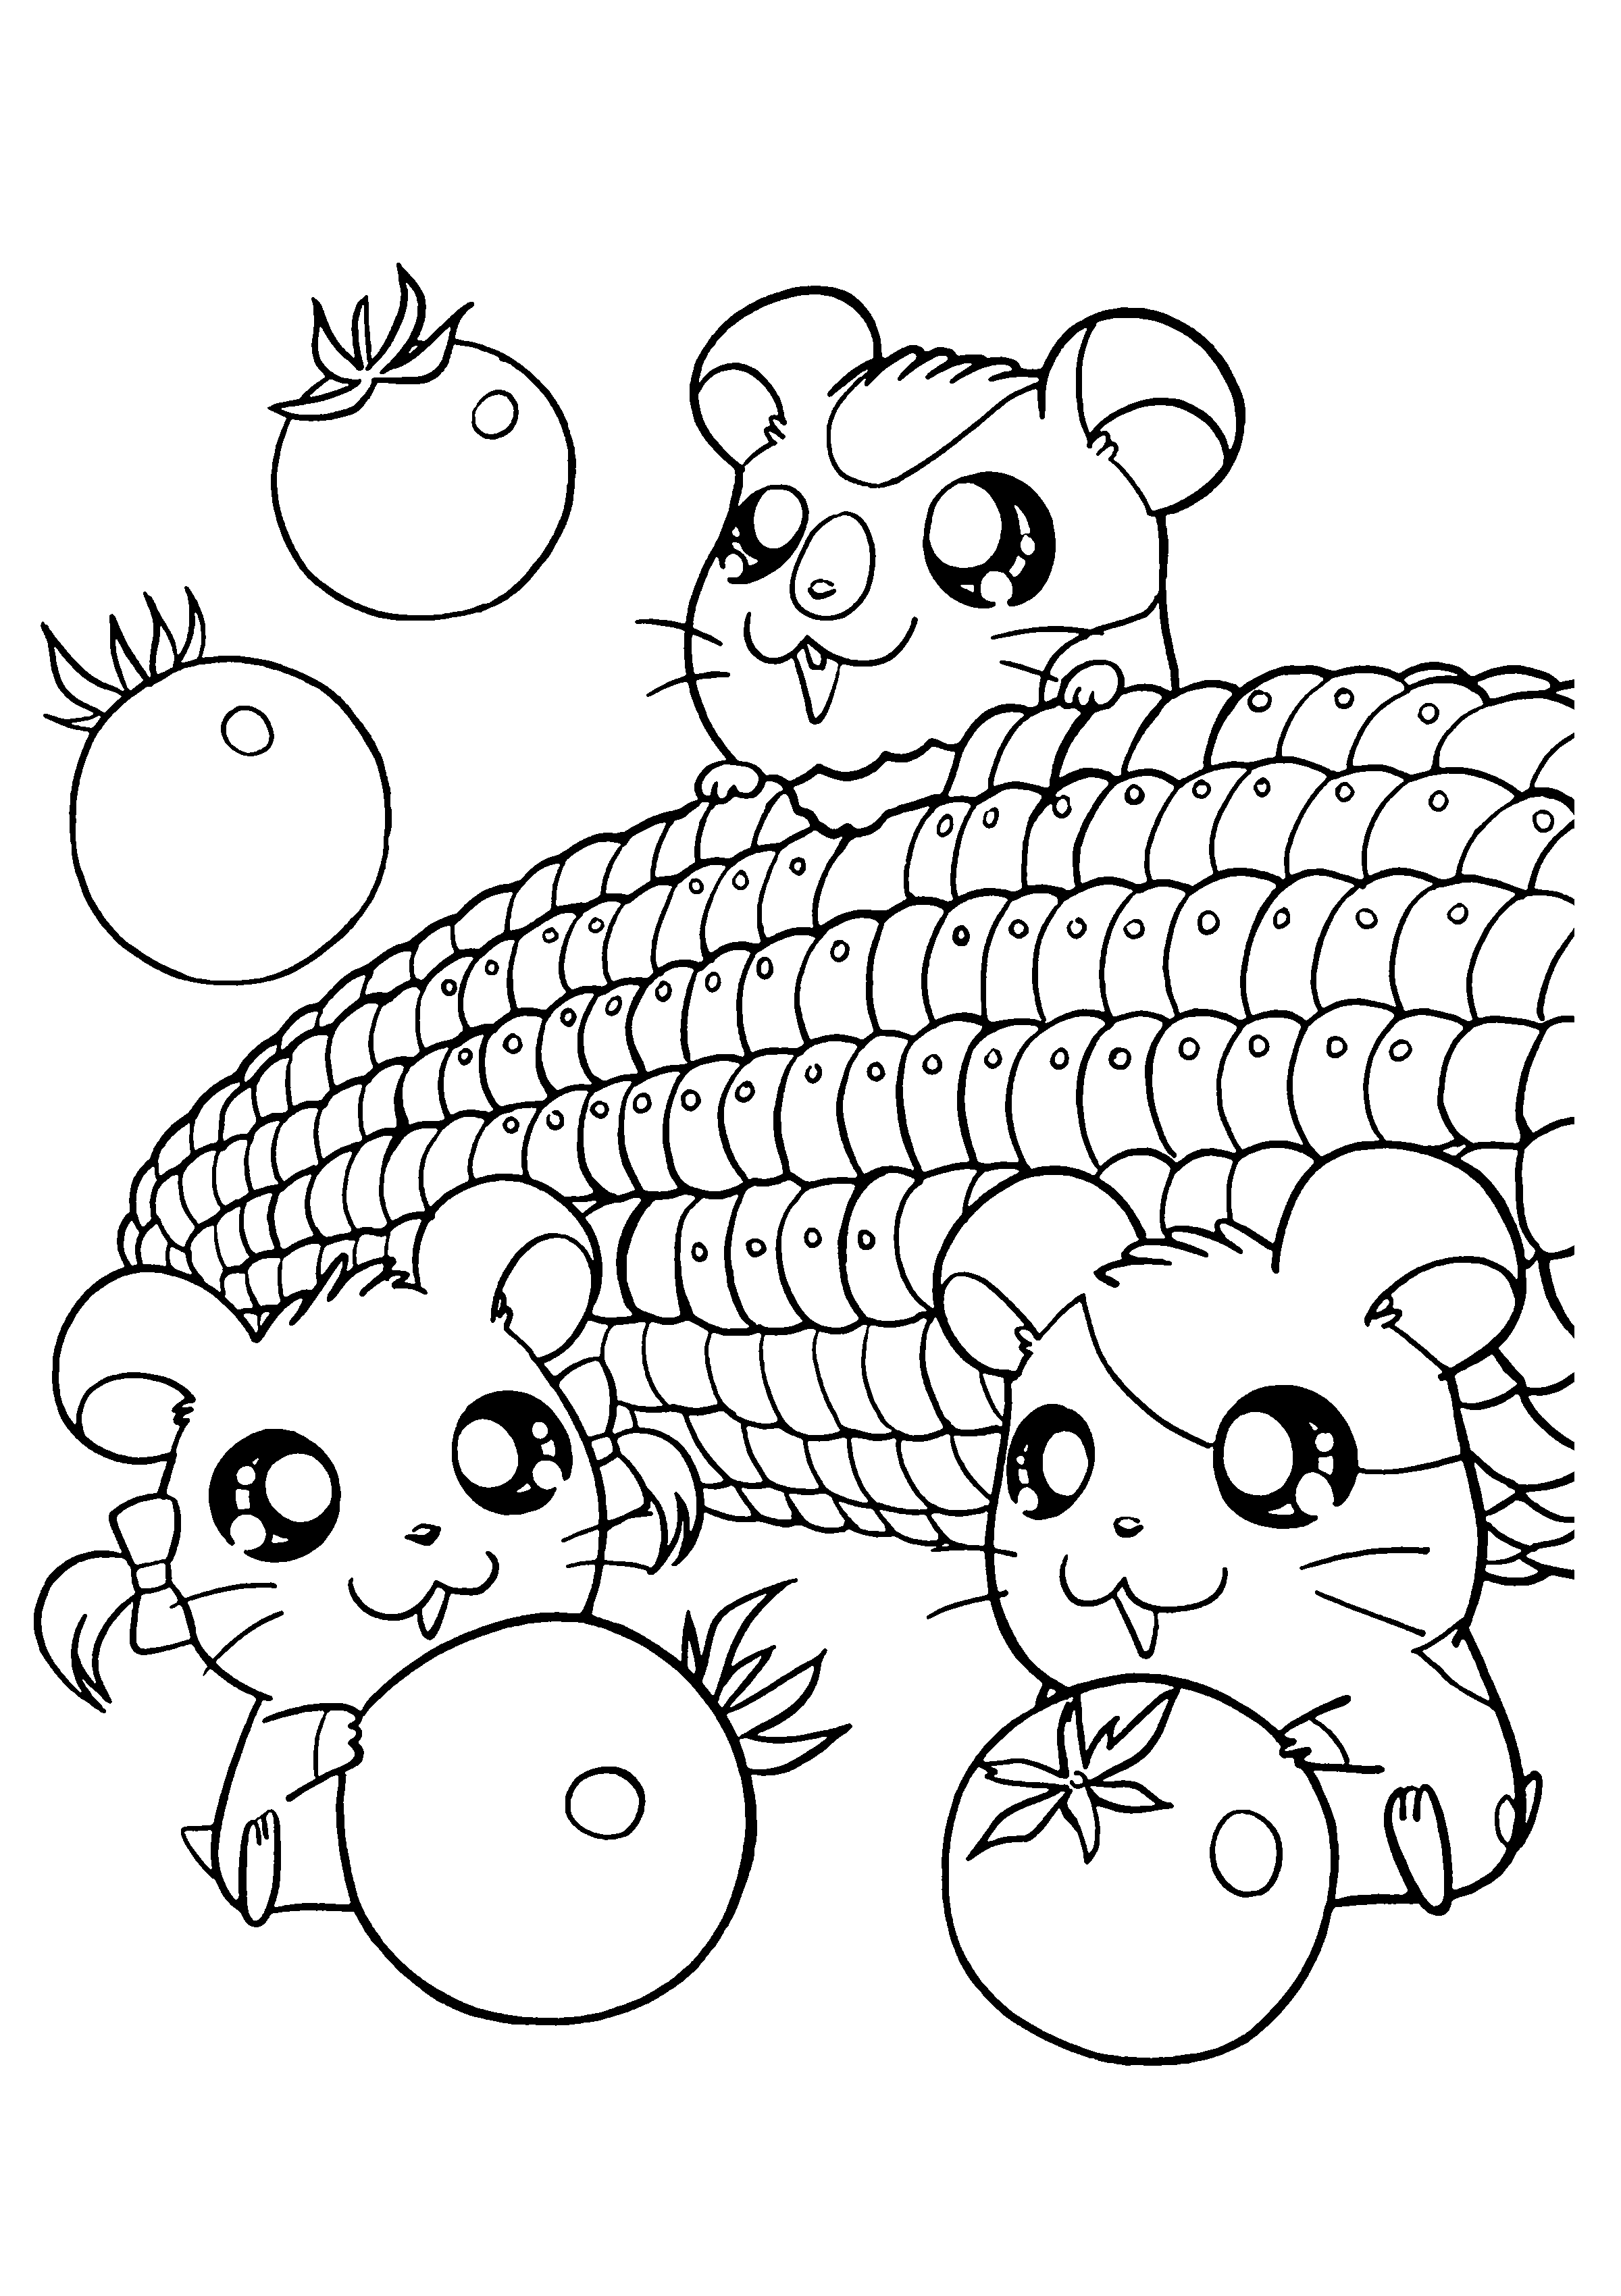 Simple Cute Kawaii Coloring Pages For Kids for Kids